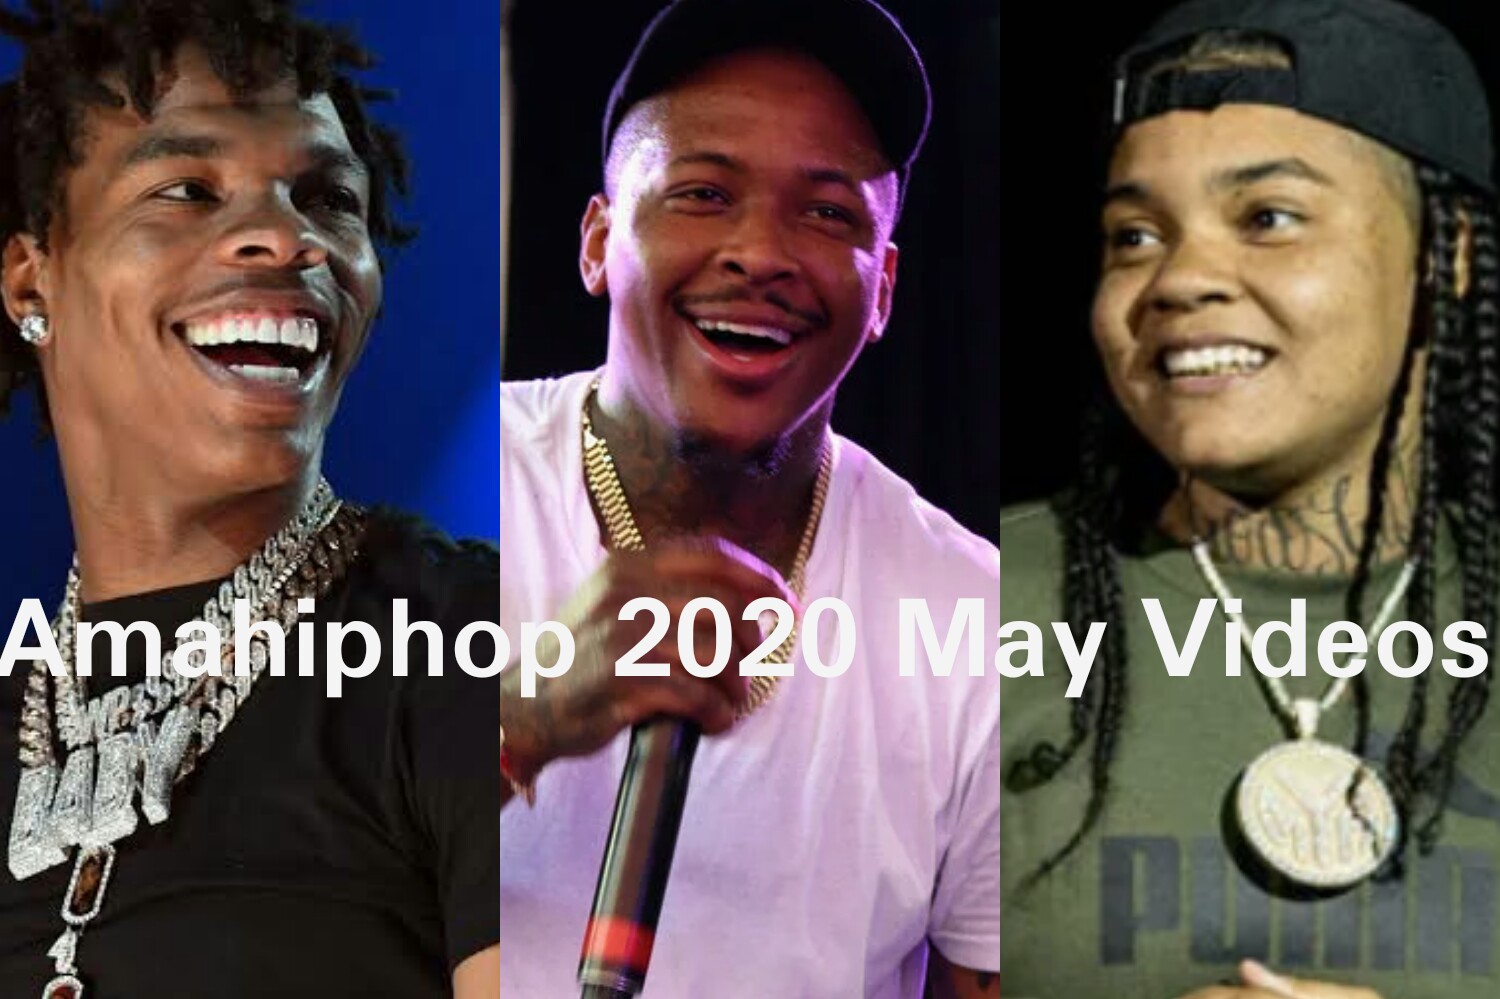 Watch Amahiphop Videos Of May 2020 Release